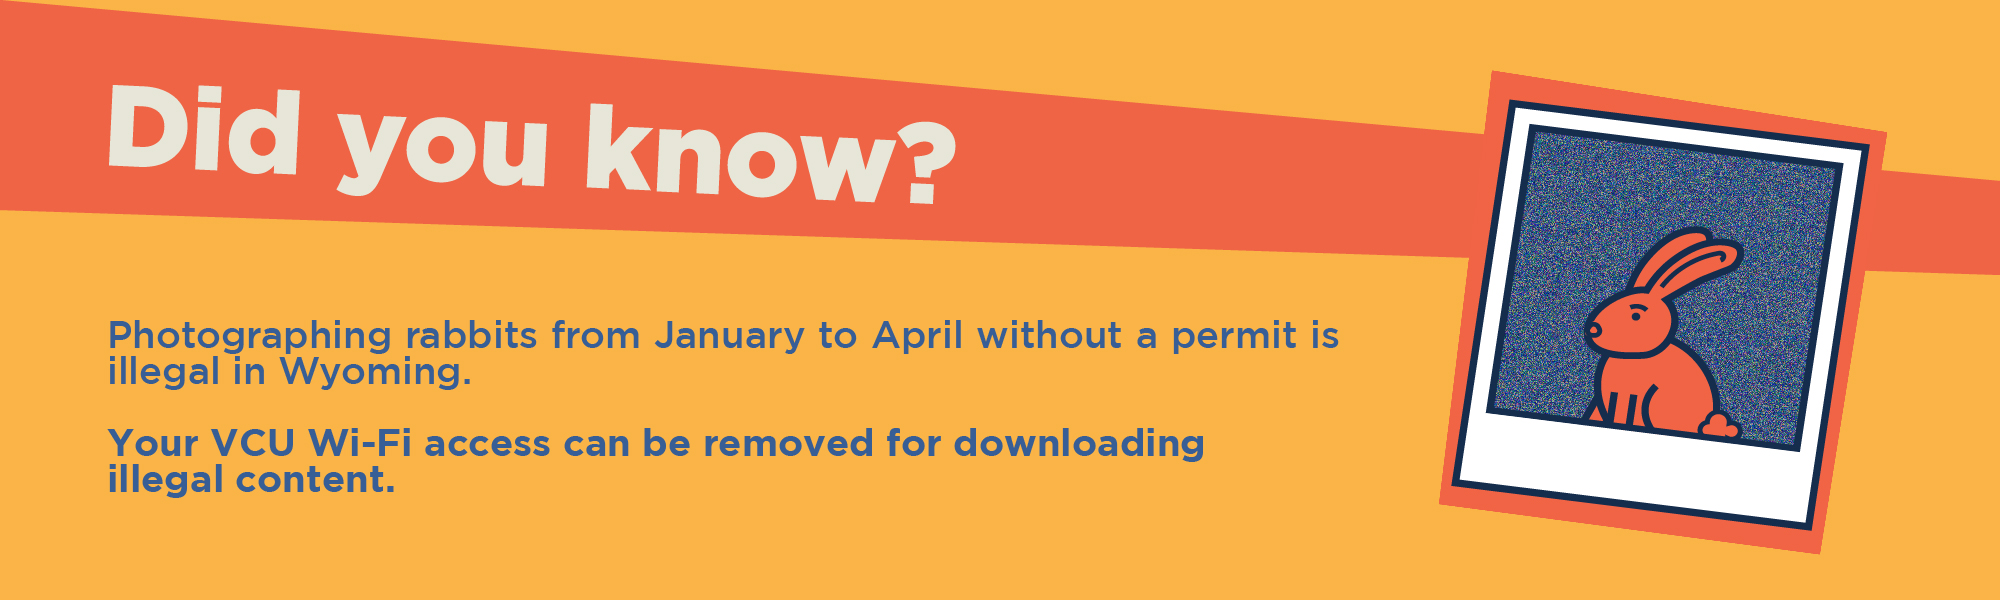 Did you know? Photographing rabbits from Janurary to April without a permit is illegal in Wyoming. Your VCU Wi-fi access can be removed for downloading illegal content.